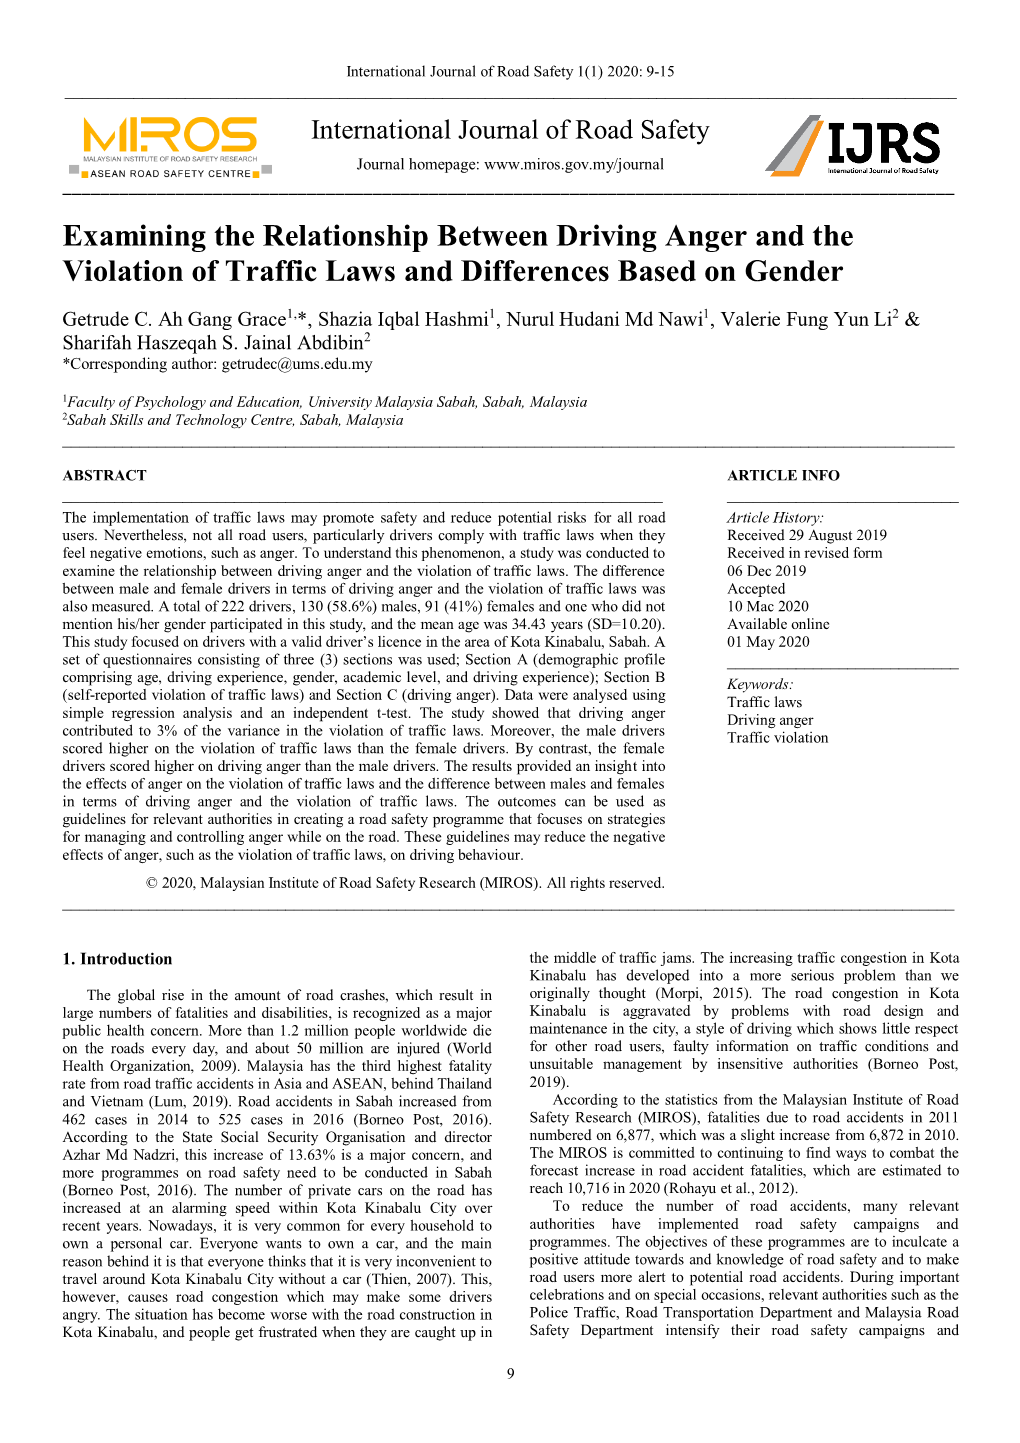 Examining the Relationship Between Driving Anger and the Violation of Traffic Laws and Differences Based on Gender